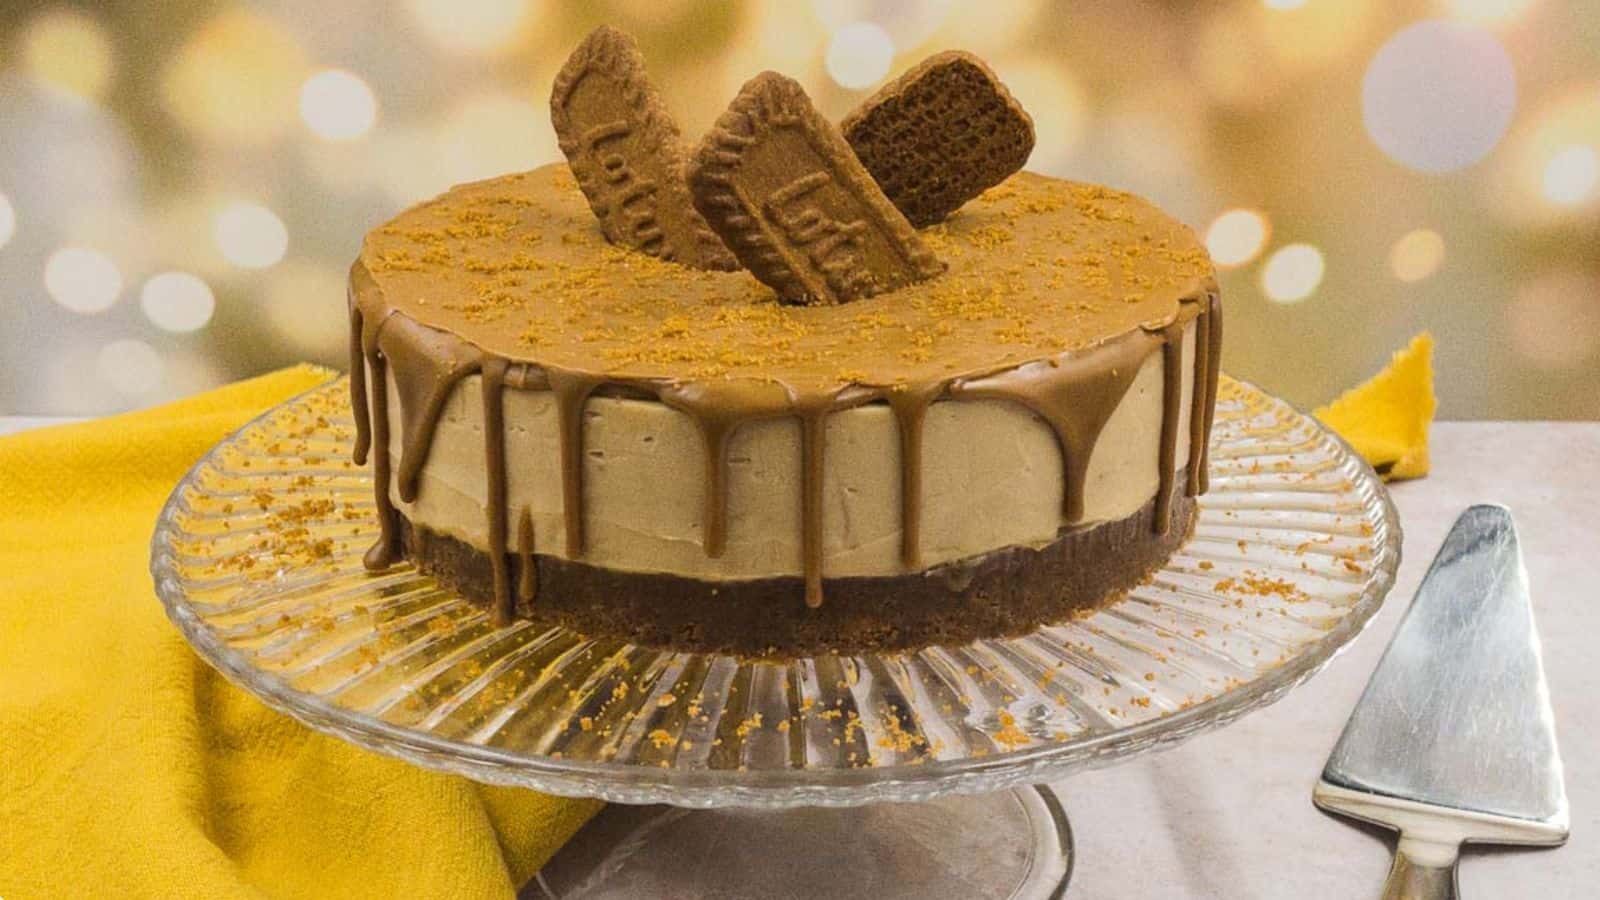 <p>For the cookie butter fans in the house. It’s a modern take on cheesecake, bringing in that unique Biscoff flavor. They’ll be asking for this weekly.<br><strong>Get the Recipe: </strong><a href="https://www.splashoftaste.com/biscoff-cheesecake/?utm_source=msn&utm_medium=page&utm_campaign=msn">Biscoff Cheesecake</a></p>